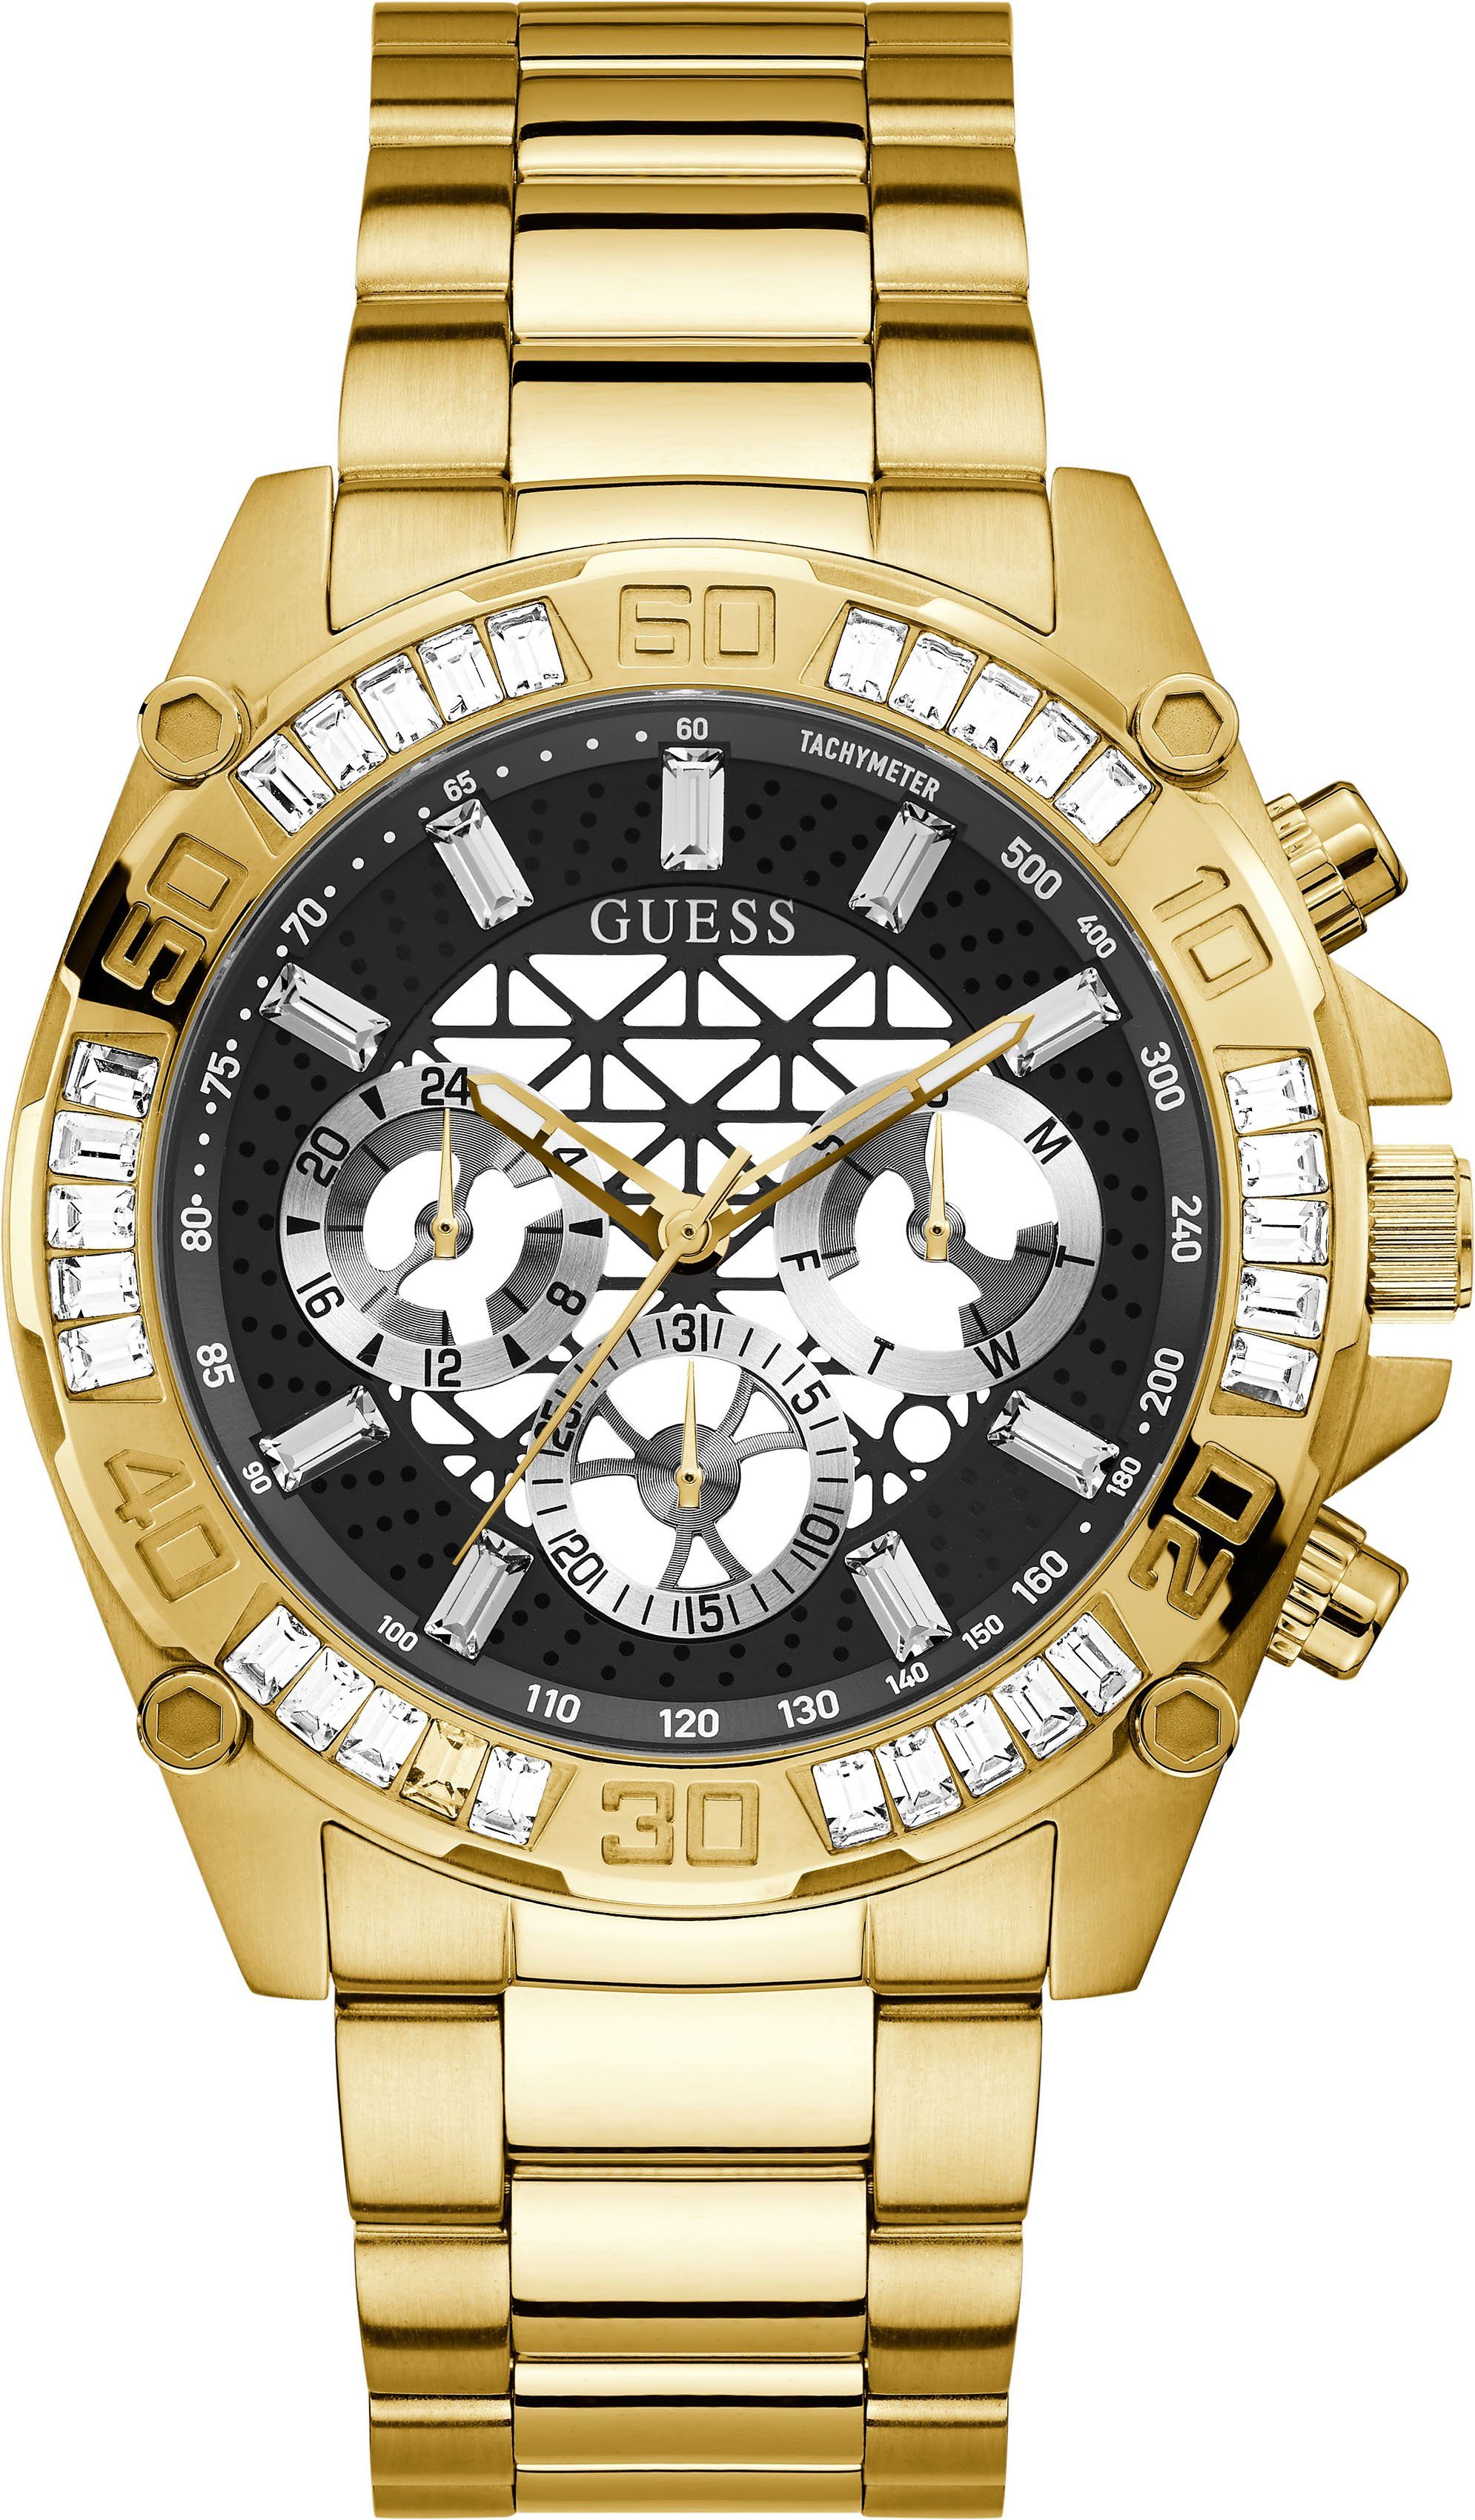 Multifunktionsuhr GW0390G2 Guess TROPHY,